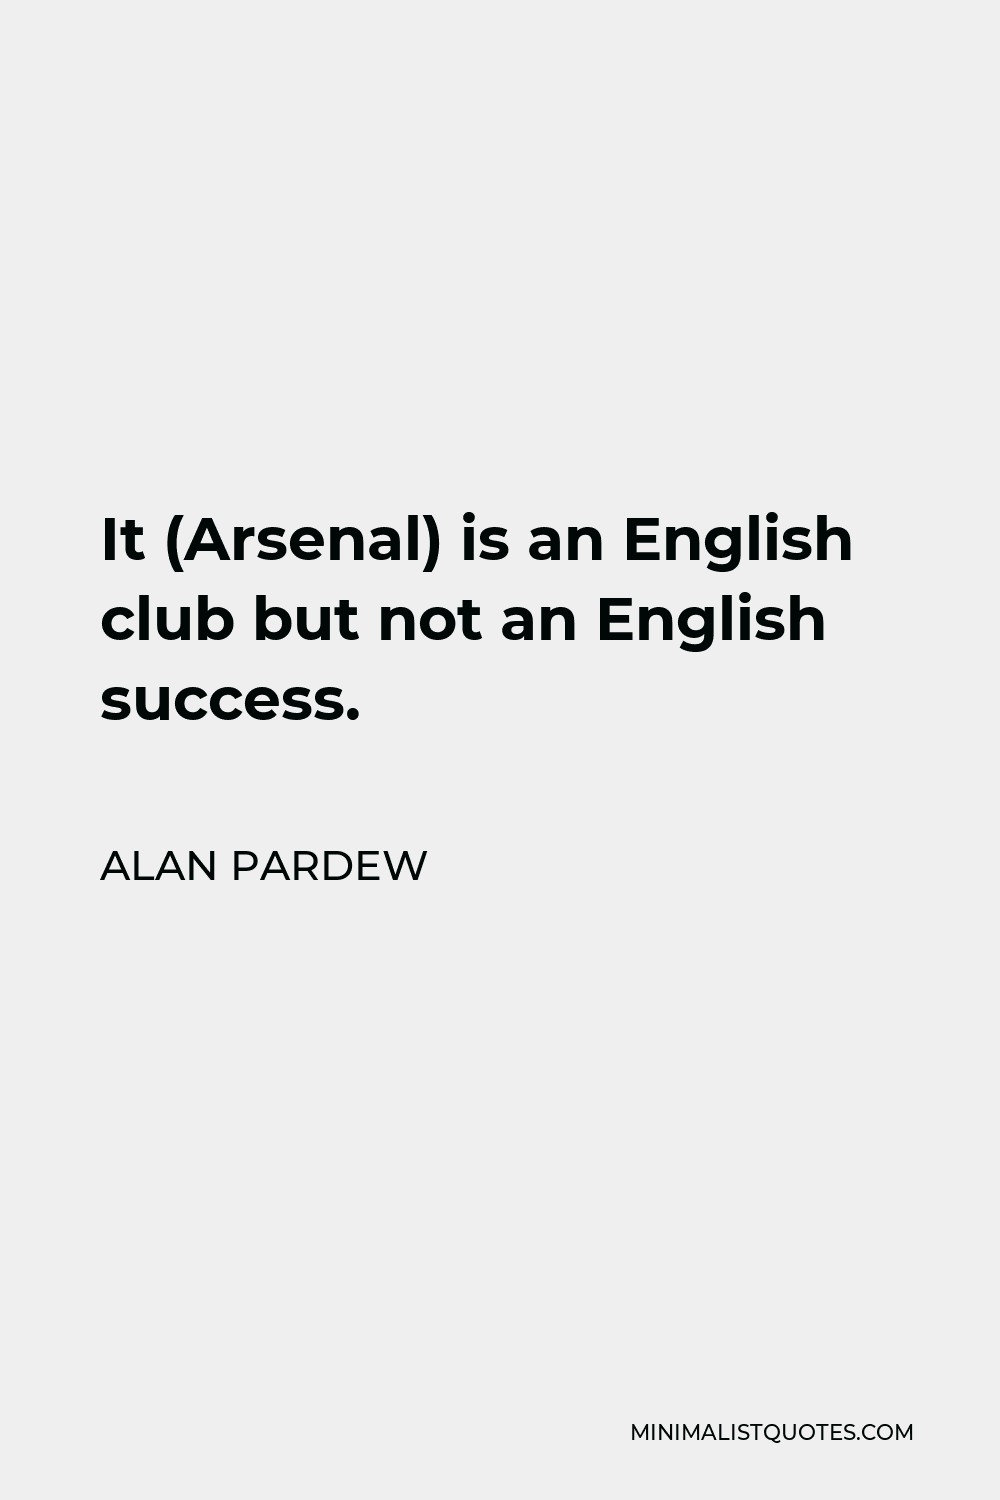 Alan Pardew Quote - It (Arsenal) is an English club but not an English success.